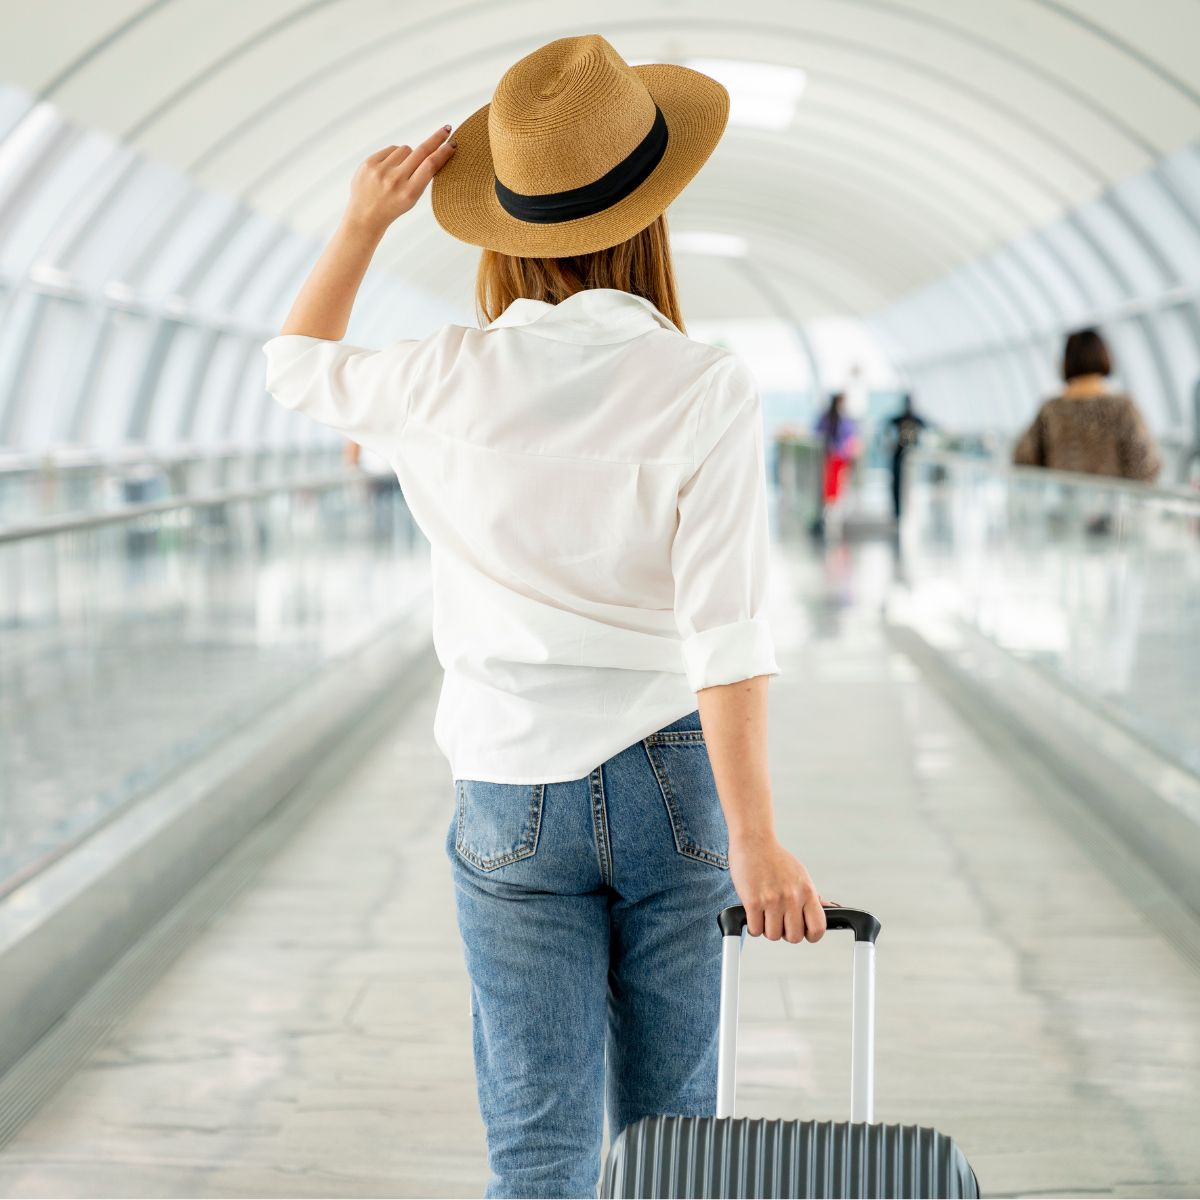 27 Things to Pack if You’re Traveling Solo This Year